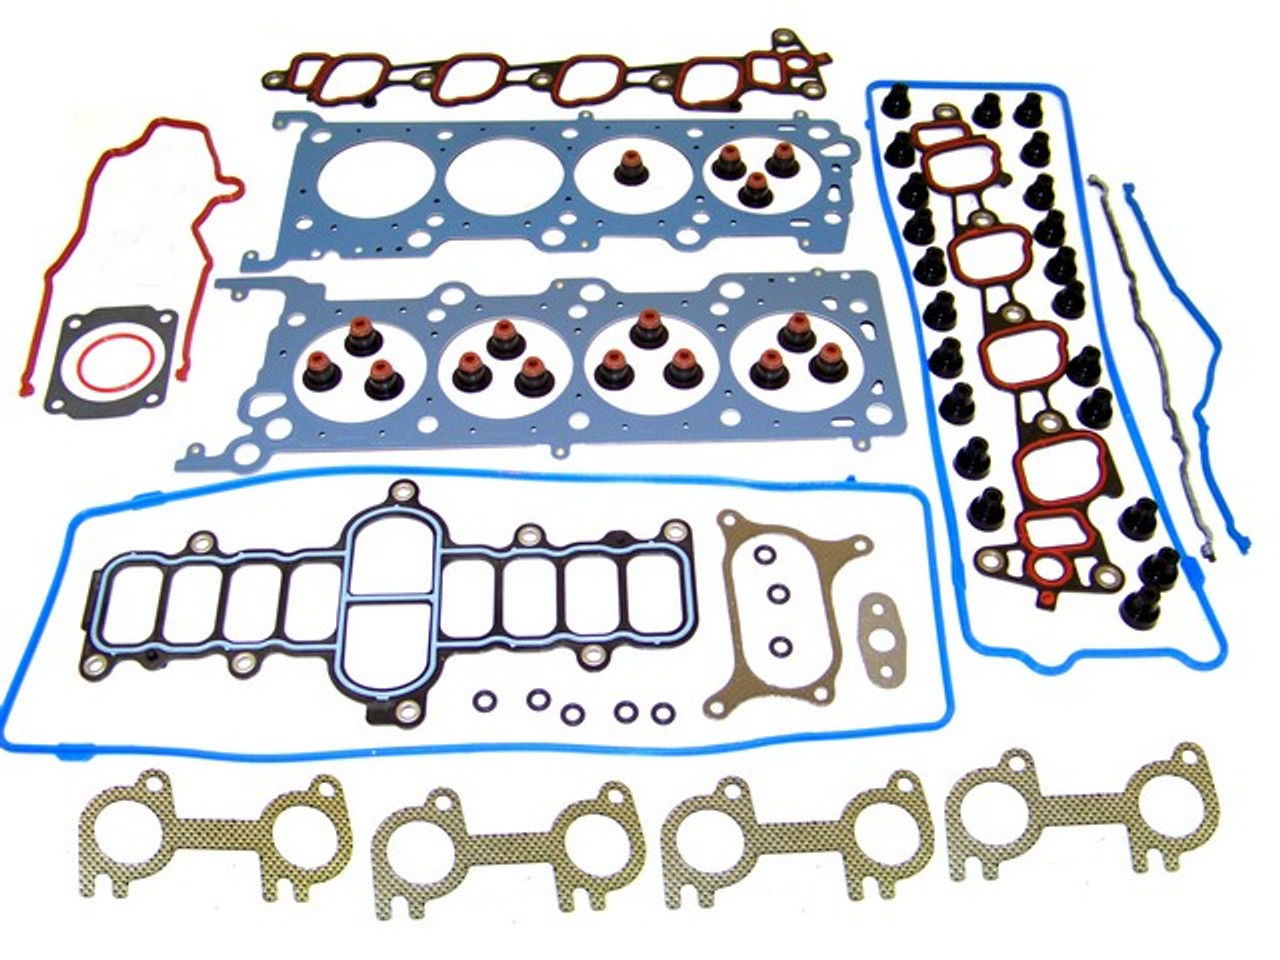 Head Gasket Set 4.6L 2002 Ford Expedition - HGS4169.4